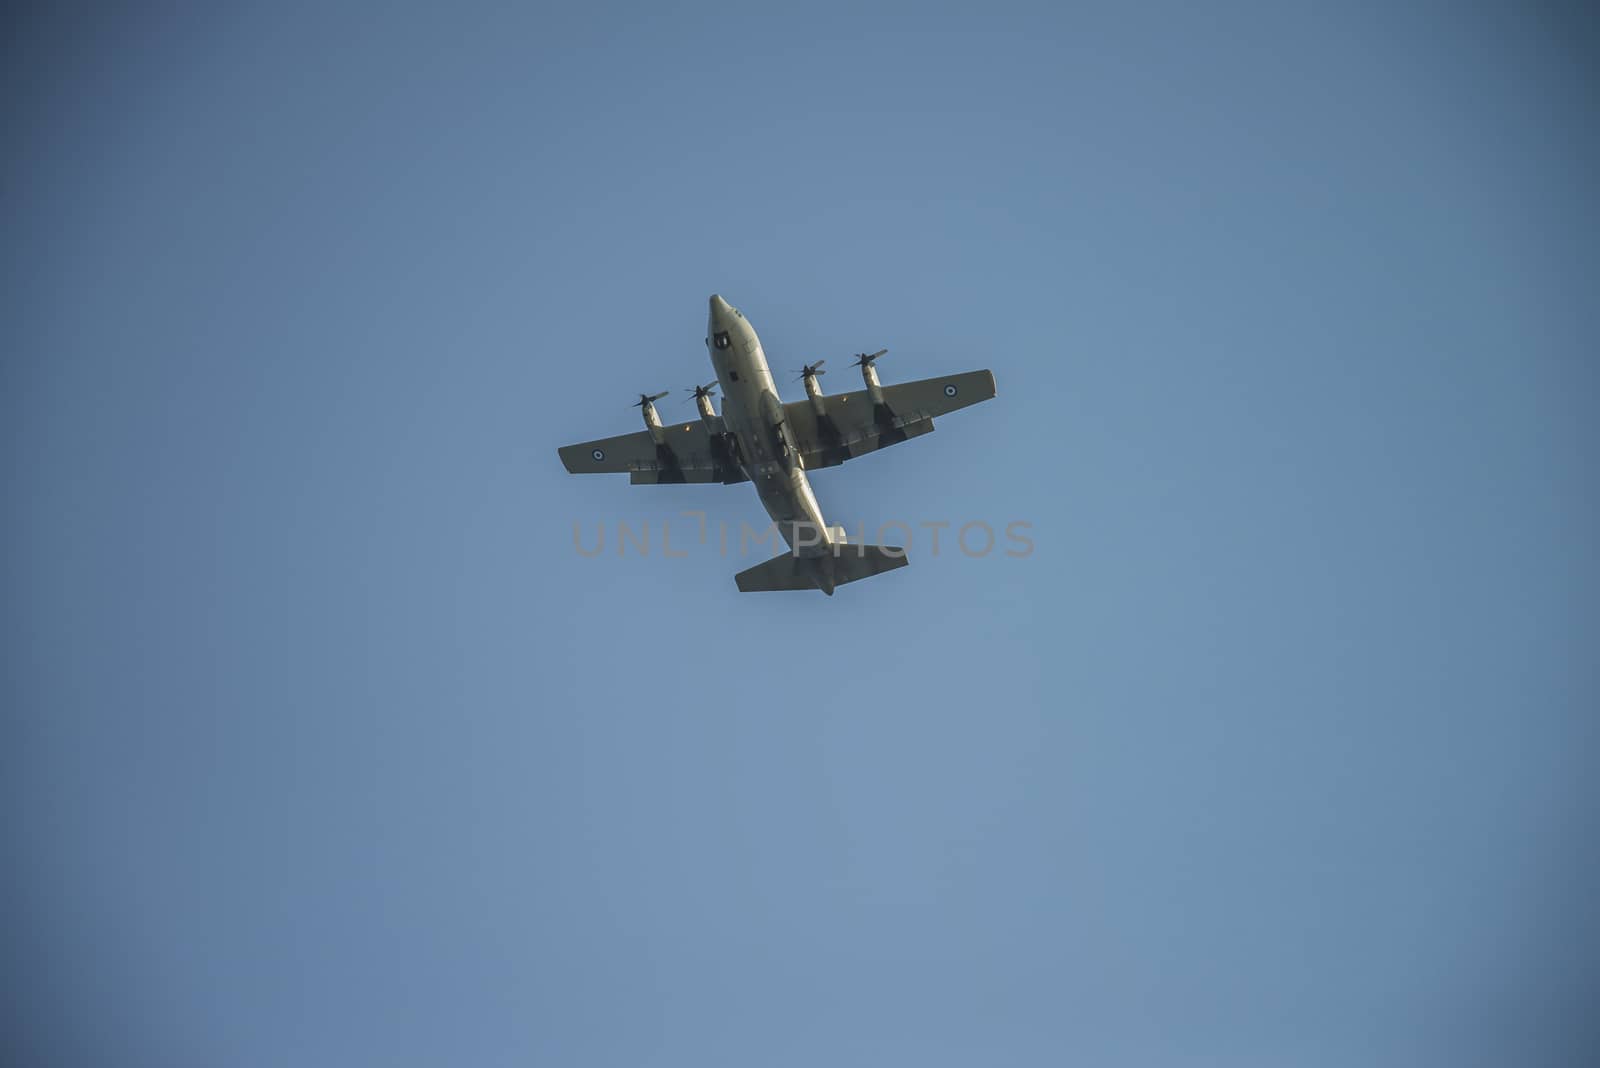 Four-engine propeller aircraft in the air. The pictures of the planes are shot very close an airport just before landing. September 2013.